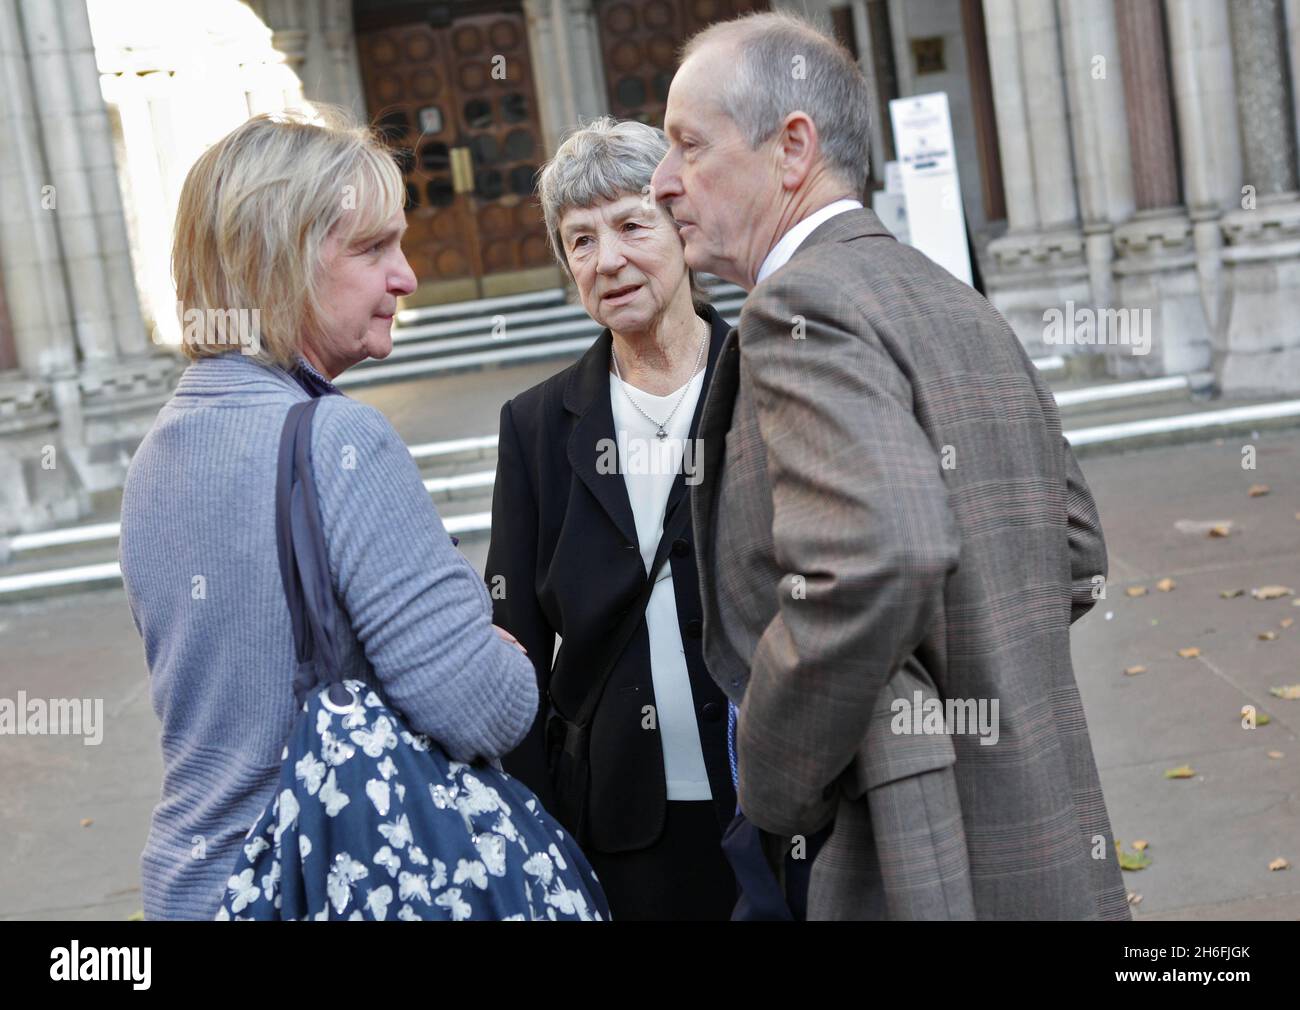 The inquests into the 7/7 bombings has begun at the High Court in London today. Hugo Keith QC, counsel to the inquests, began the hearing by reading out the names of the 52 innocent victims of the 2005 attacks. Picture shows: Family members of the victims arriving at the court. L-R Julie Nicolson whose daughter Jennifer died at Edgeware Road, Hazel Webb whose daughter died at Edgeware Road and Sean Cassidy whose son Kieran died at Kings Cross. Stock Photo